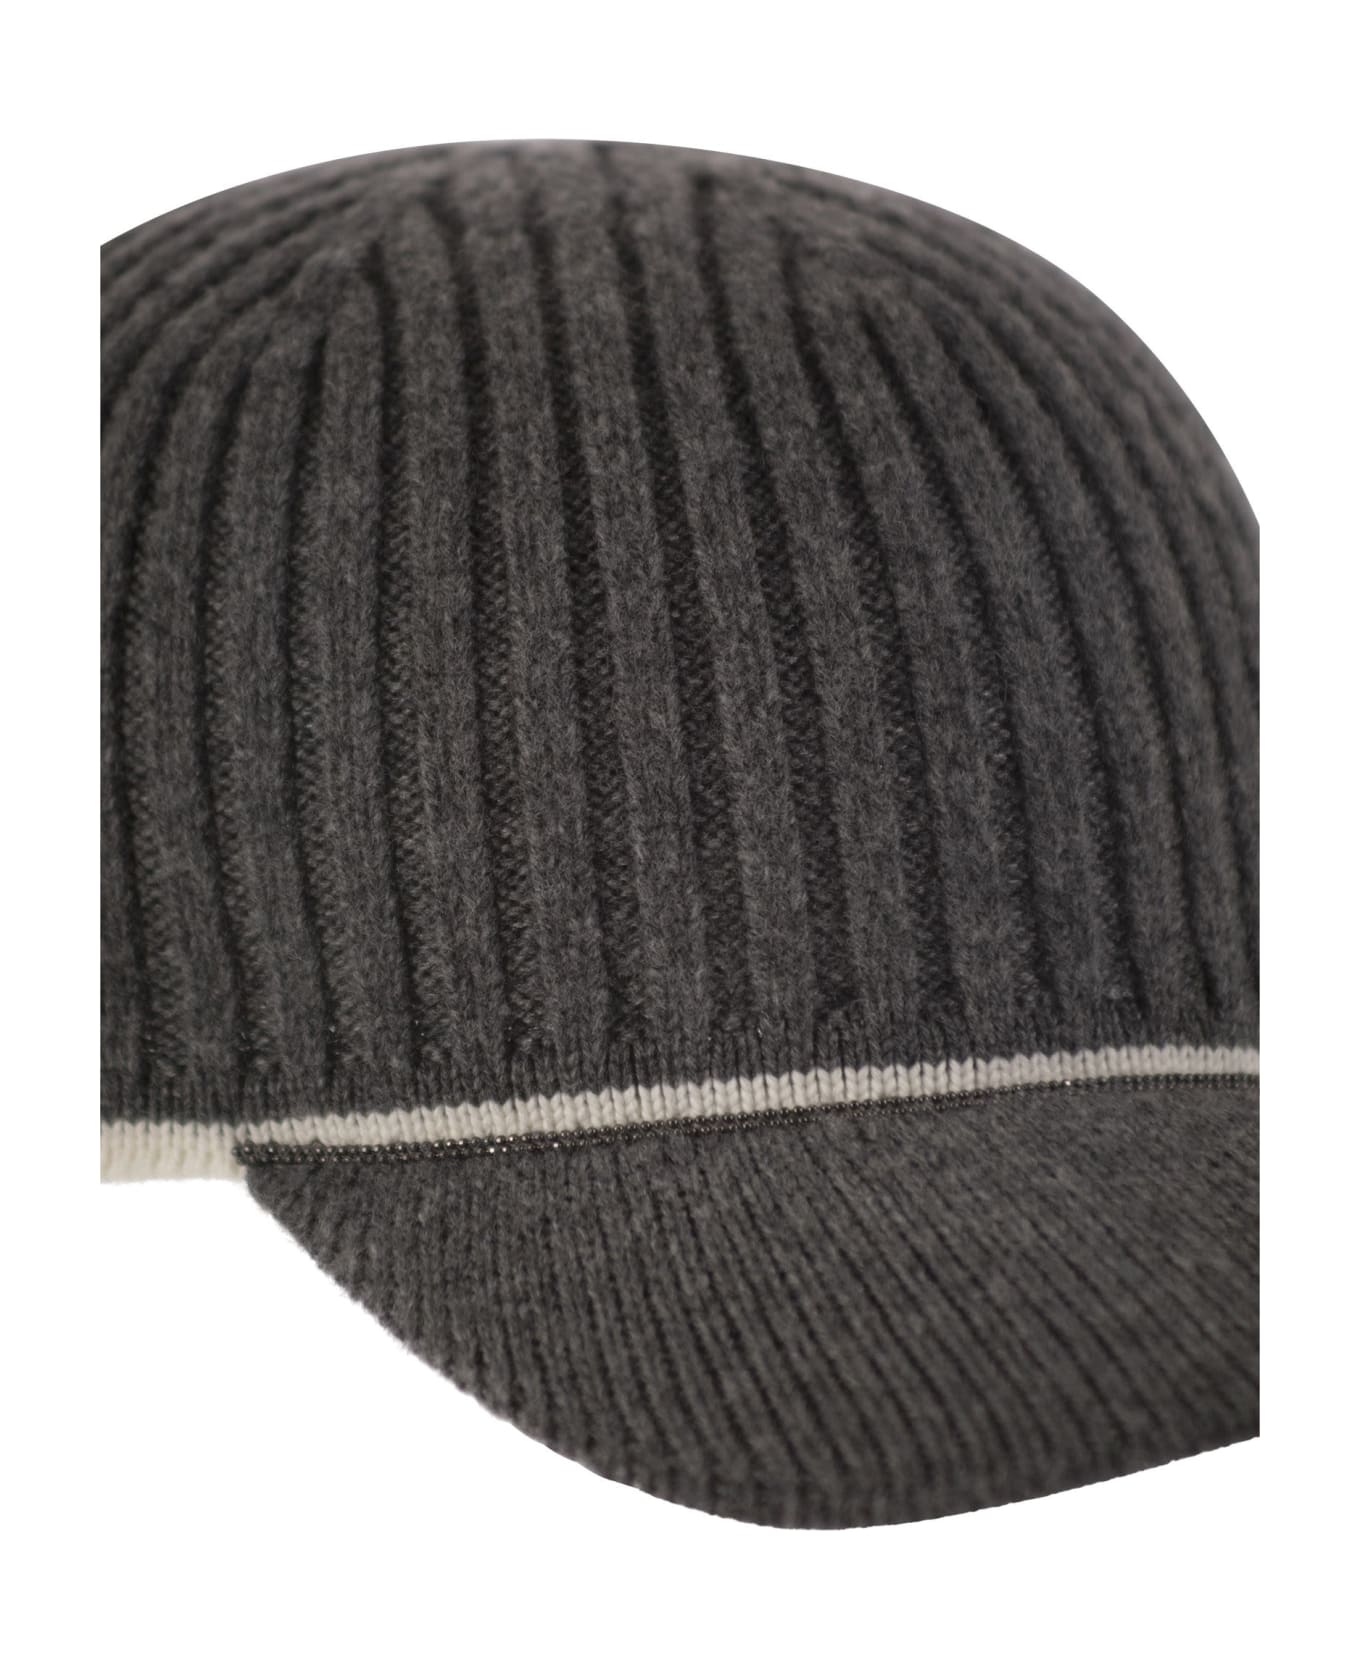 Brunello Cucinelli Ribbed Virgin Wool, Cashmere And Silk Knit Baseball Cap With Jewel - Anthracite